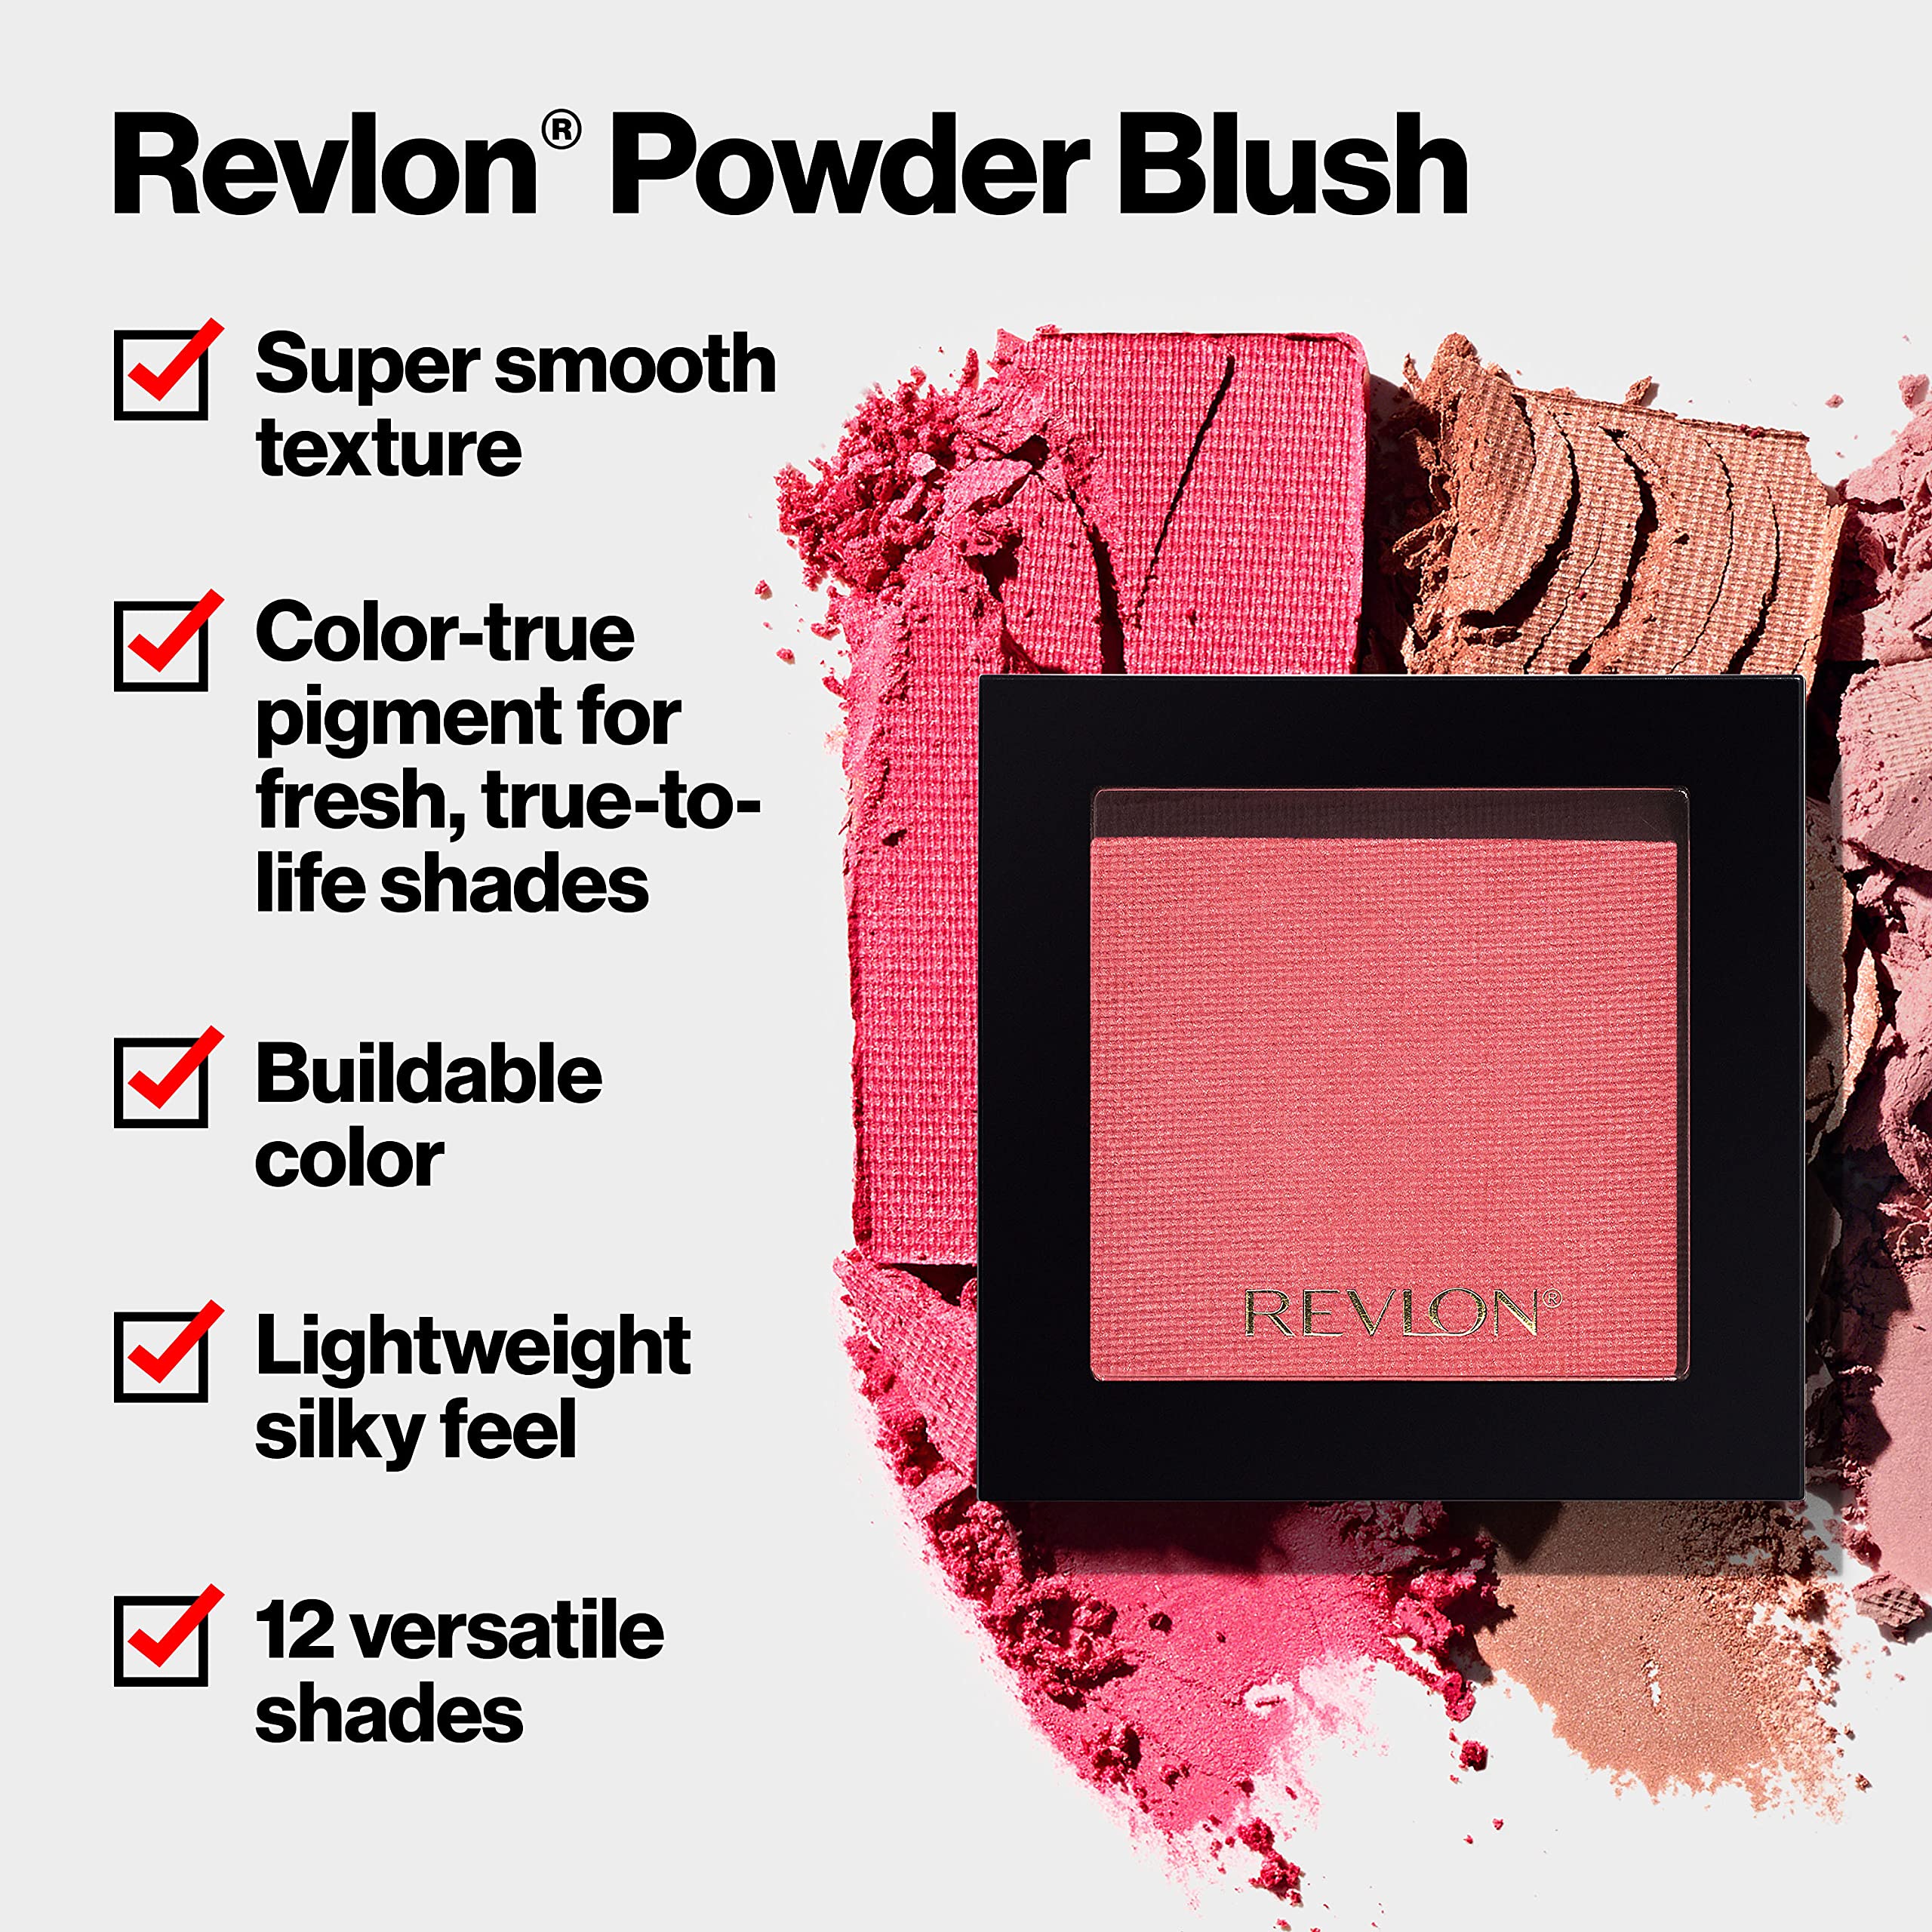 Blush by Revlon, Powder Blush Face Makeup, High Impact Buildable Color, Lightweight & Smooth Finish, 001 Oh Baby! Pink, 0.17 Oz